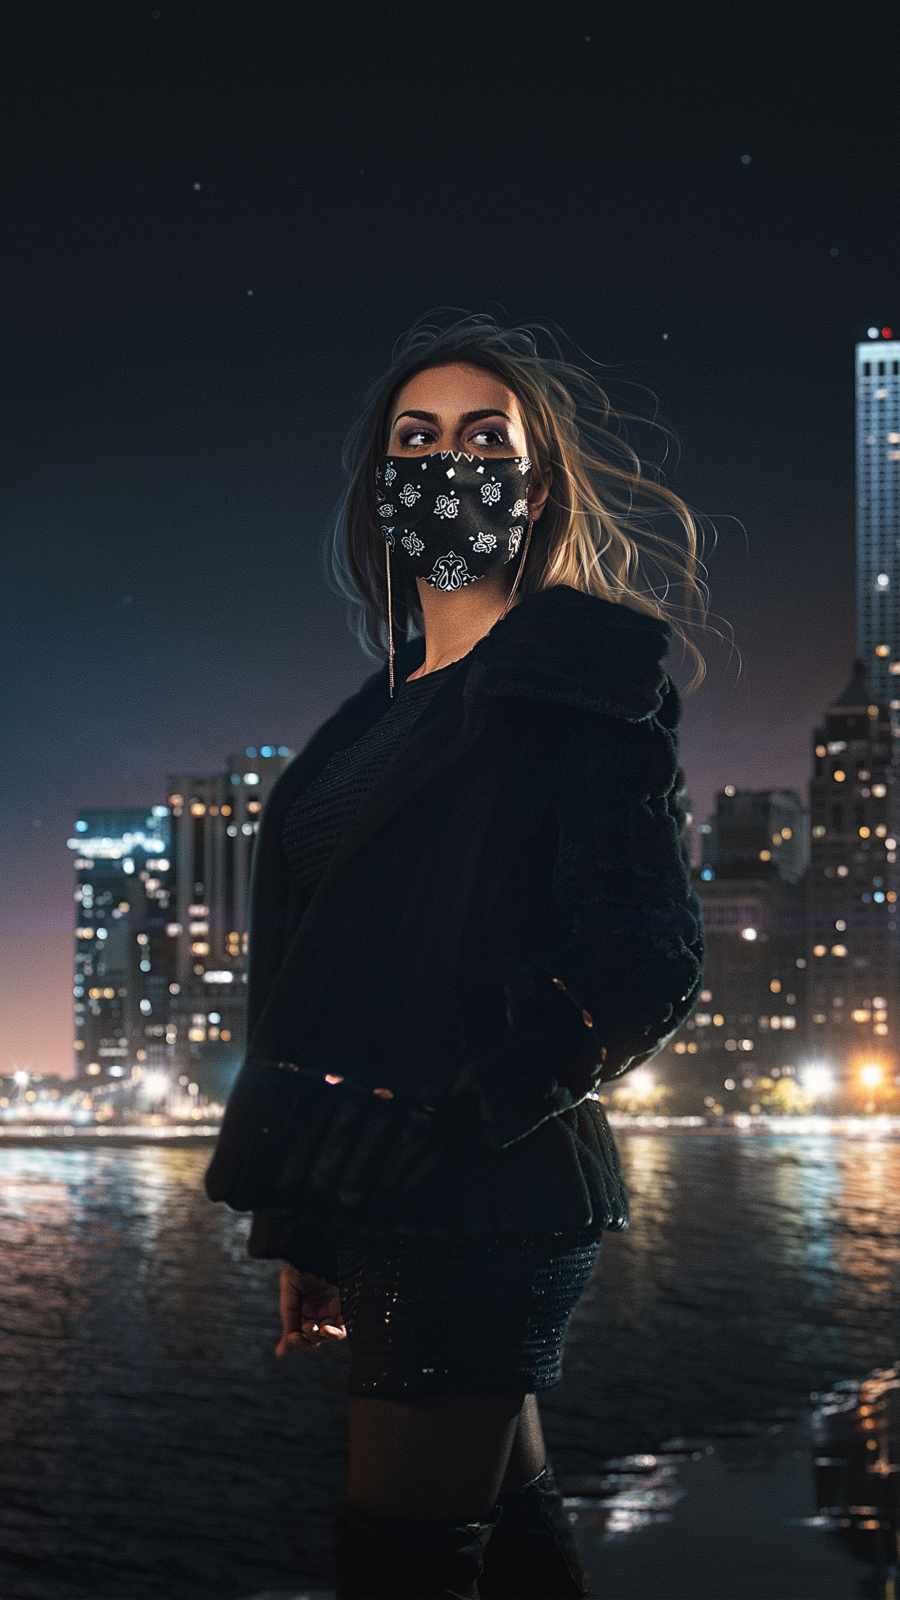 Masked Girl in Black iPhone Wallpaper